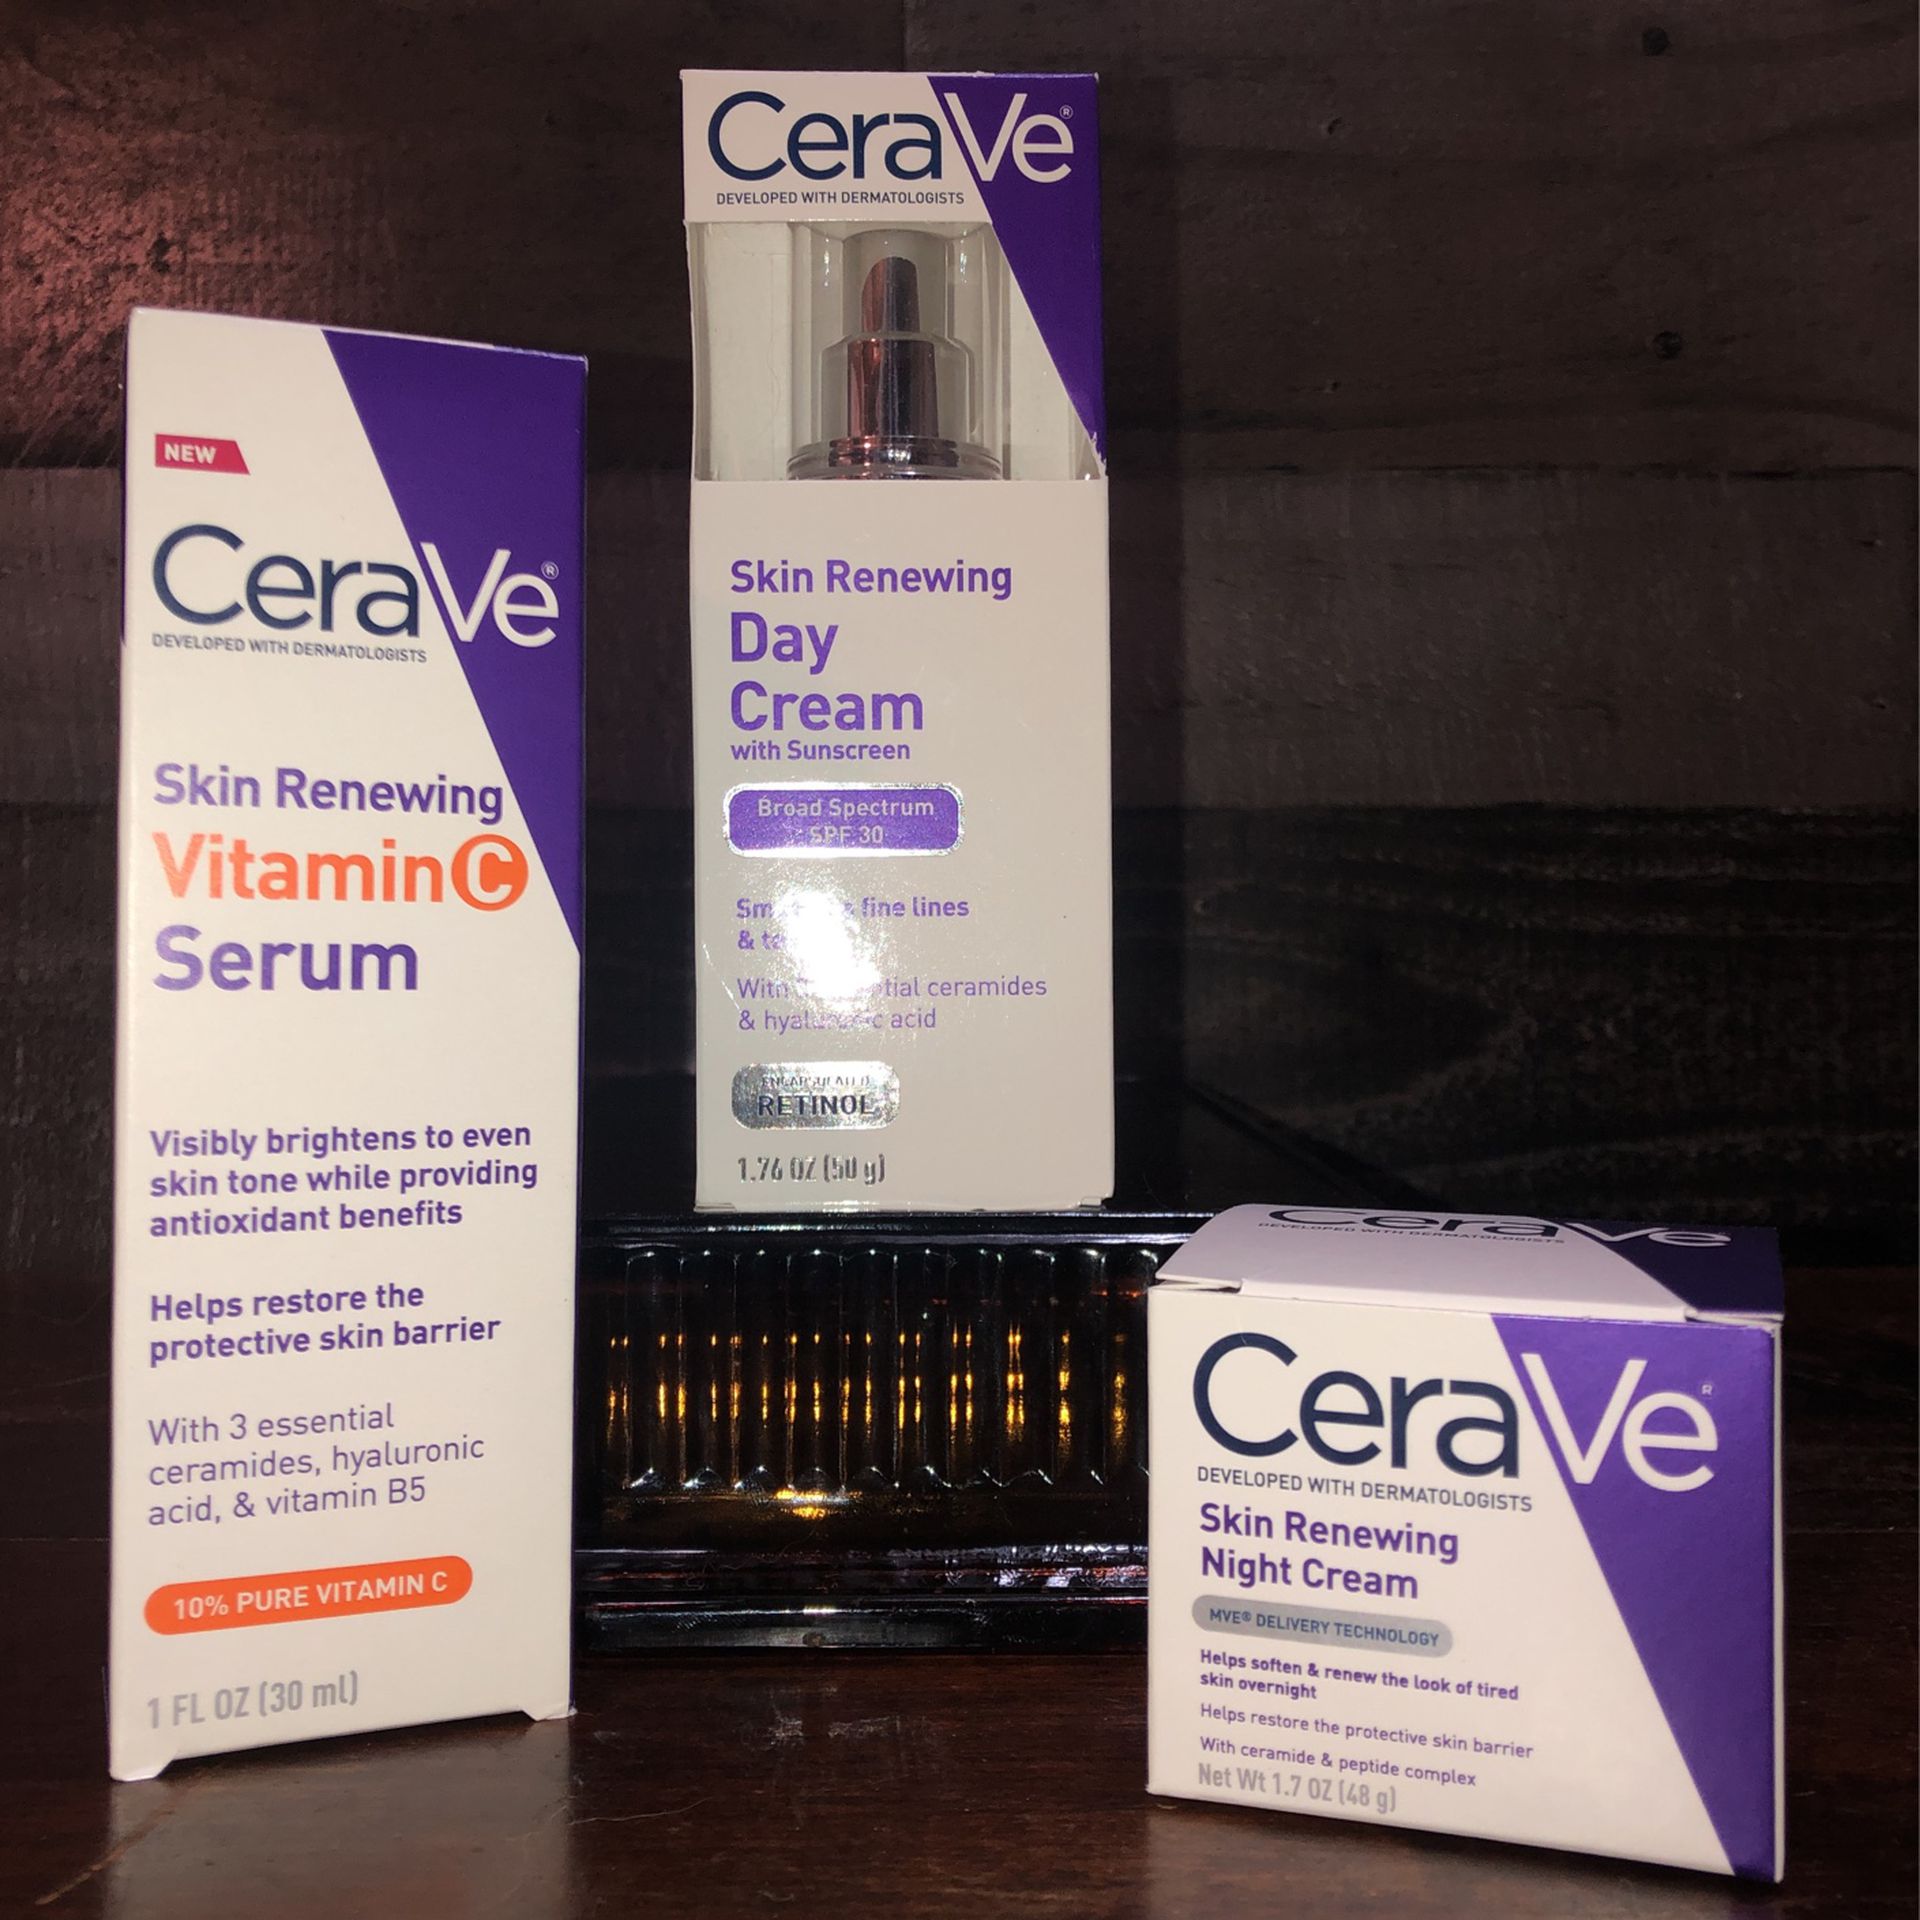 All Brand NEW! 🆕   CeraVe brand Face Care Products - Skin Renewing (((PENDING PICK UP TODAY 5-6pm)))